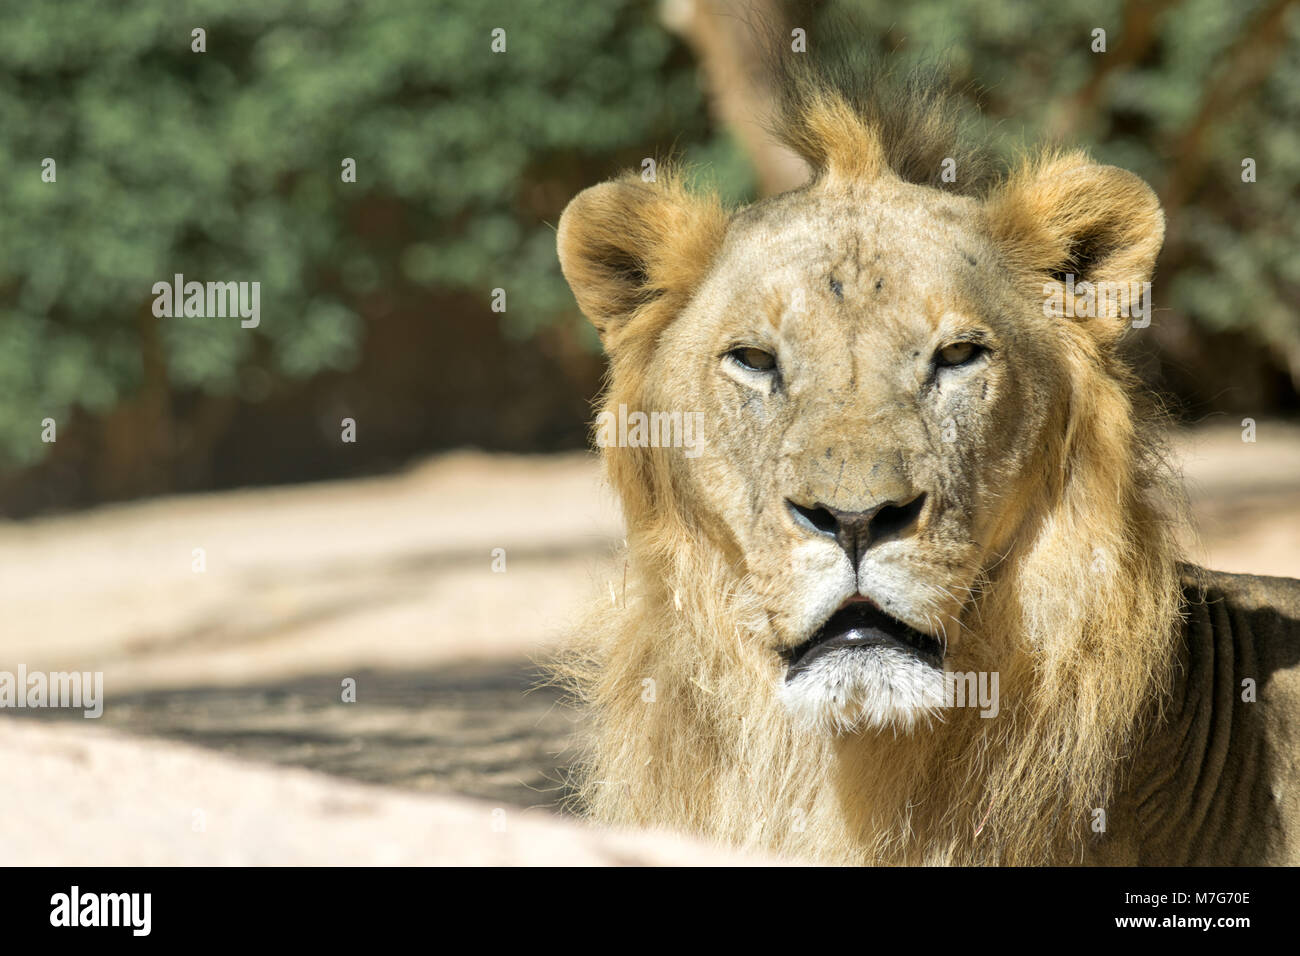 lion with tuft of hair Stock Photo